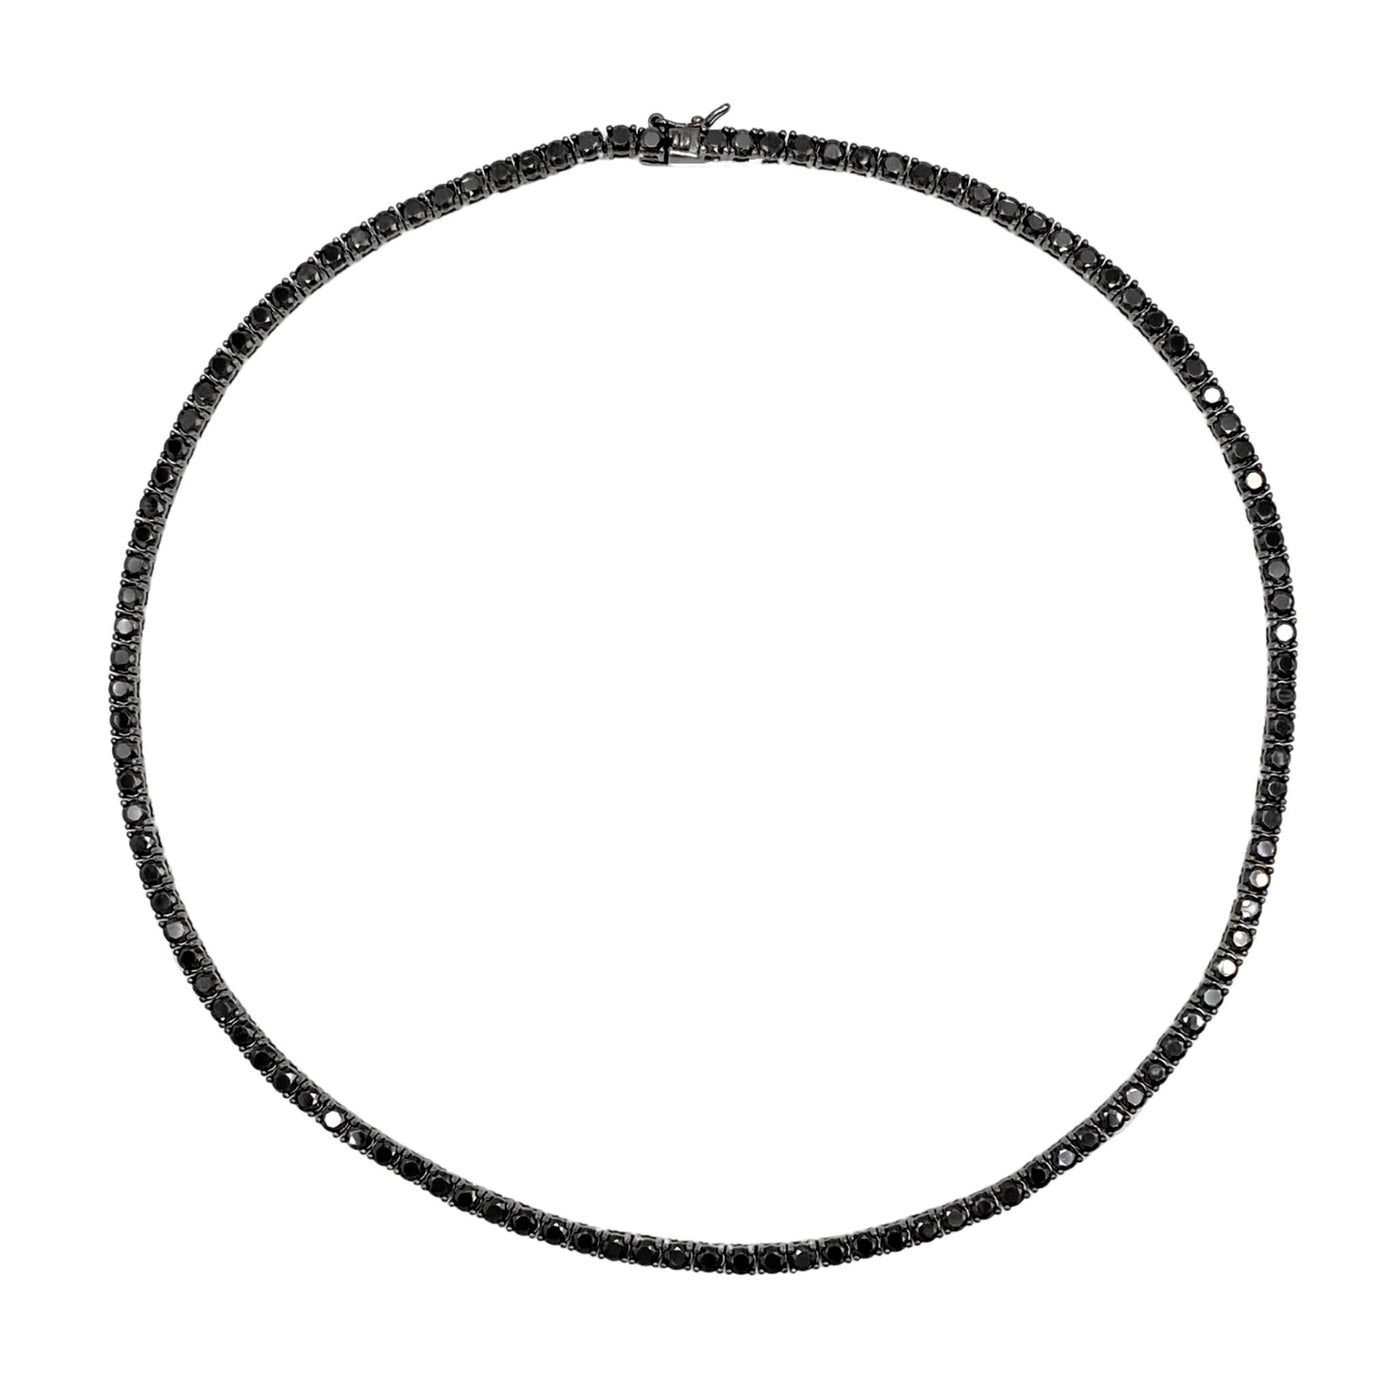 Silver casting tennis necklace with black round stones - 3 mm